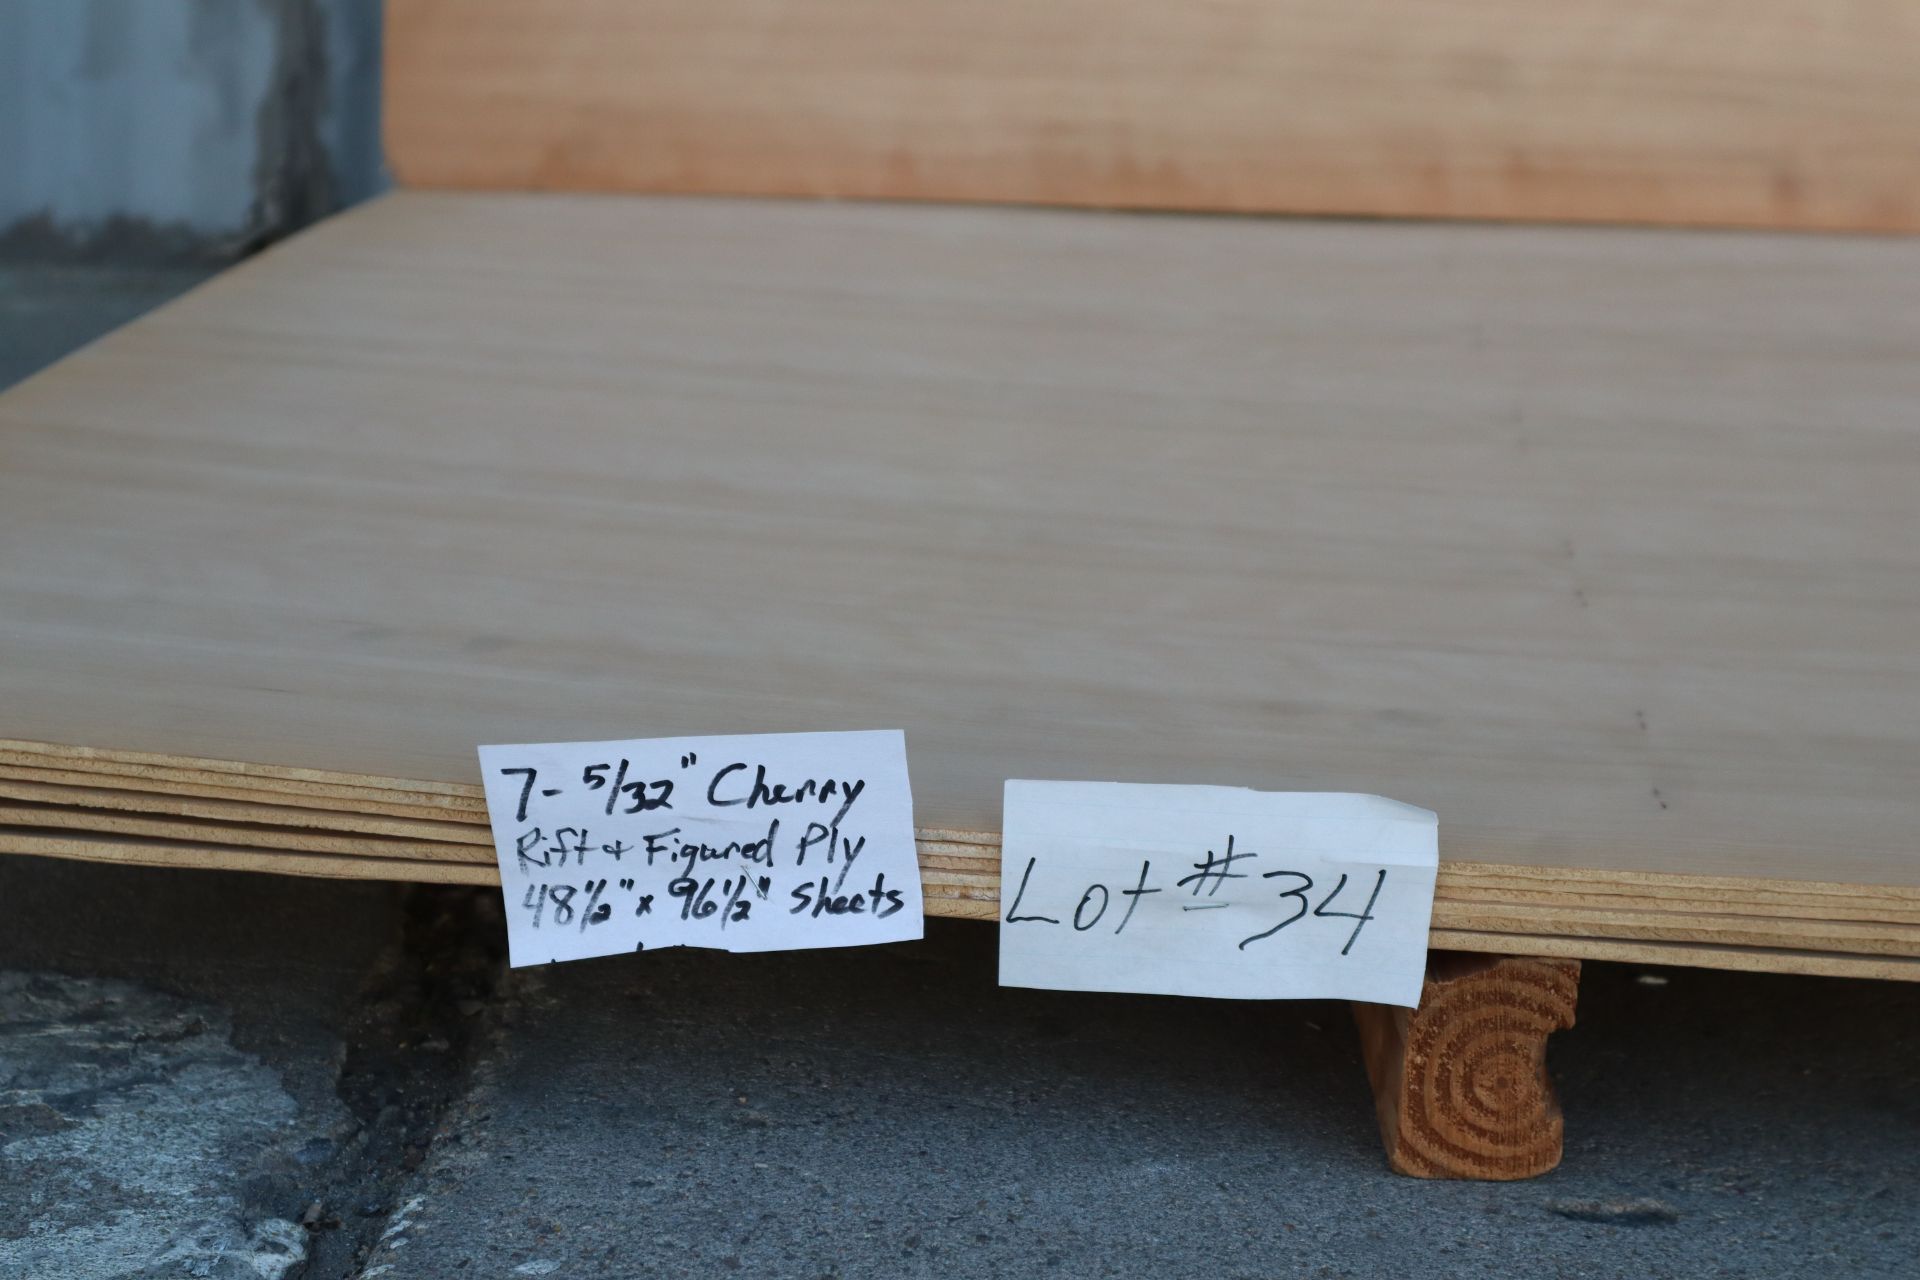 7-Sheets 5/32" Cherry Rift & Figured Plywood, 48-1/2x96-1/2" - Image 4 of 4